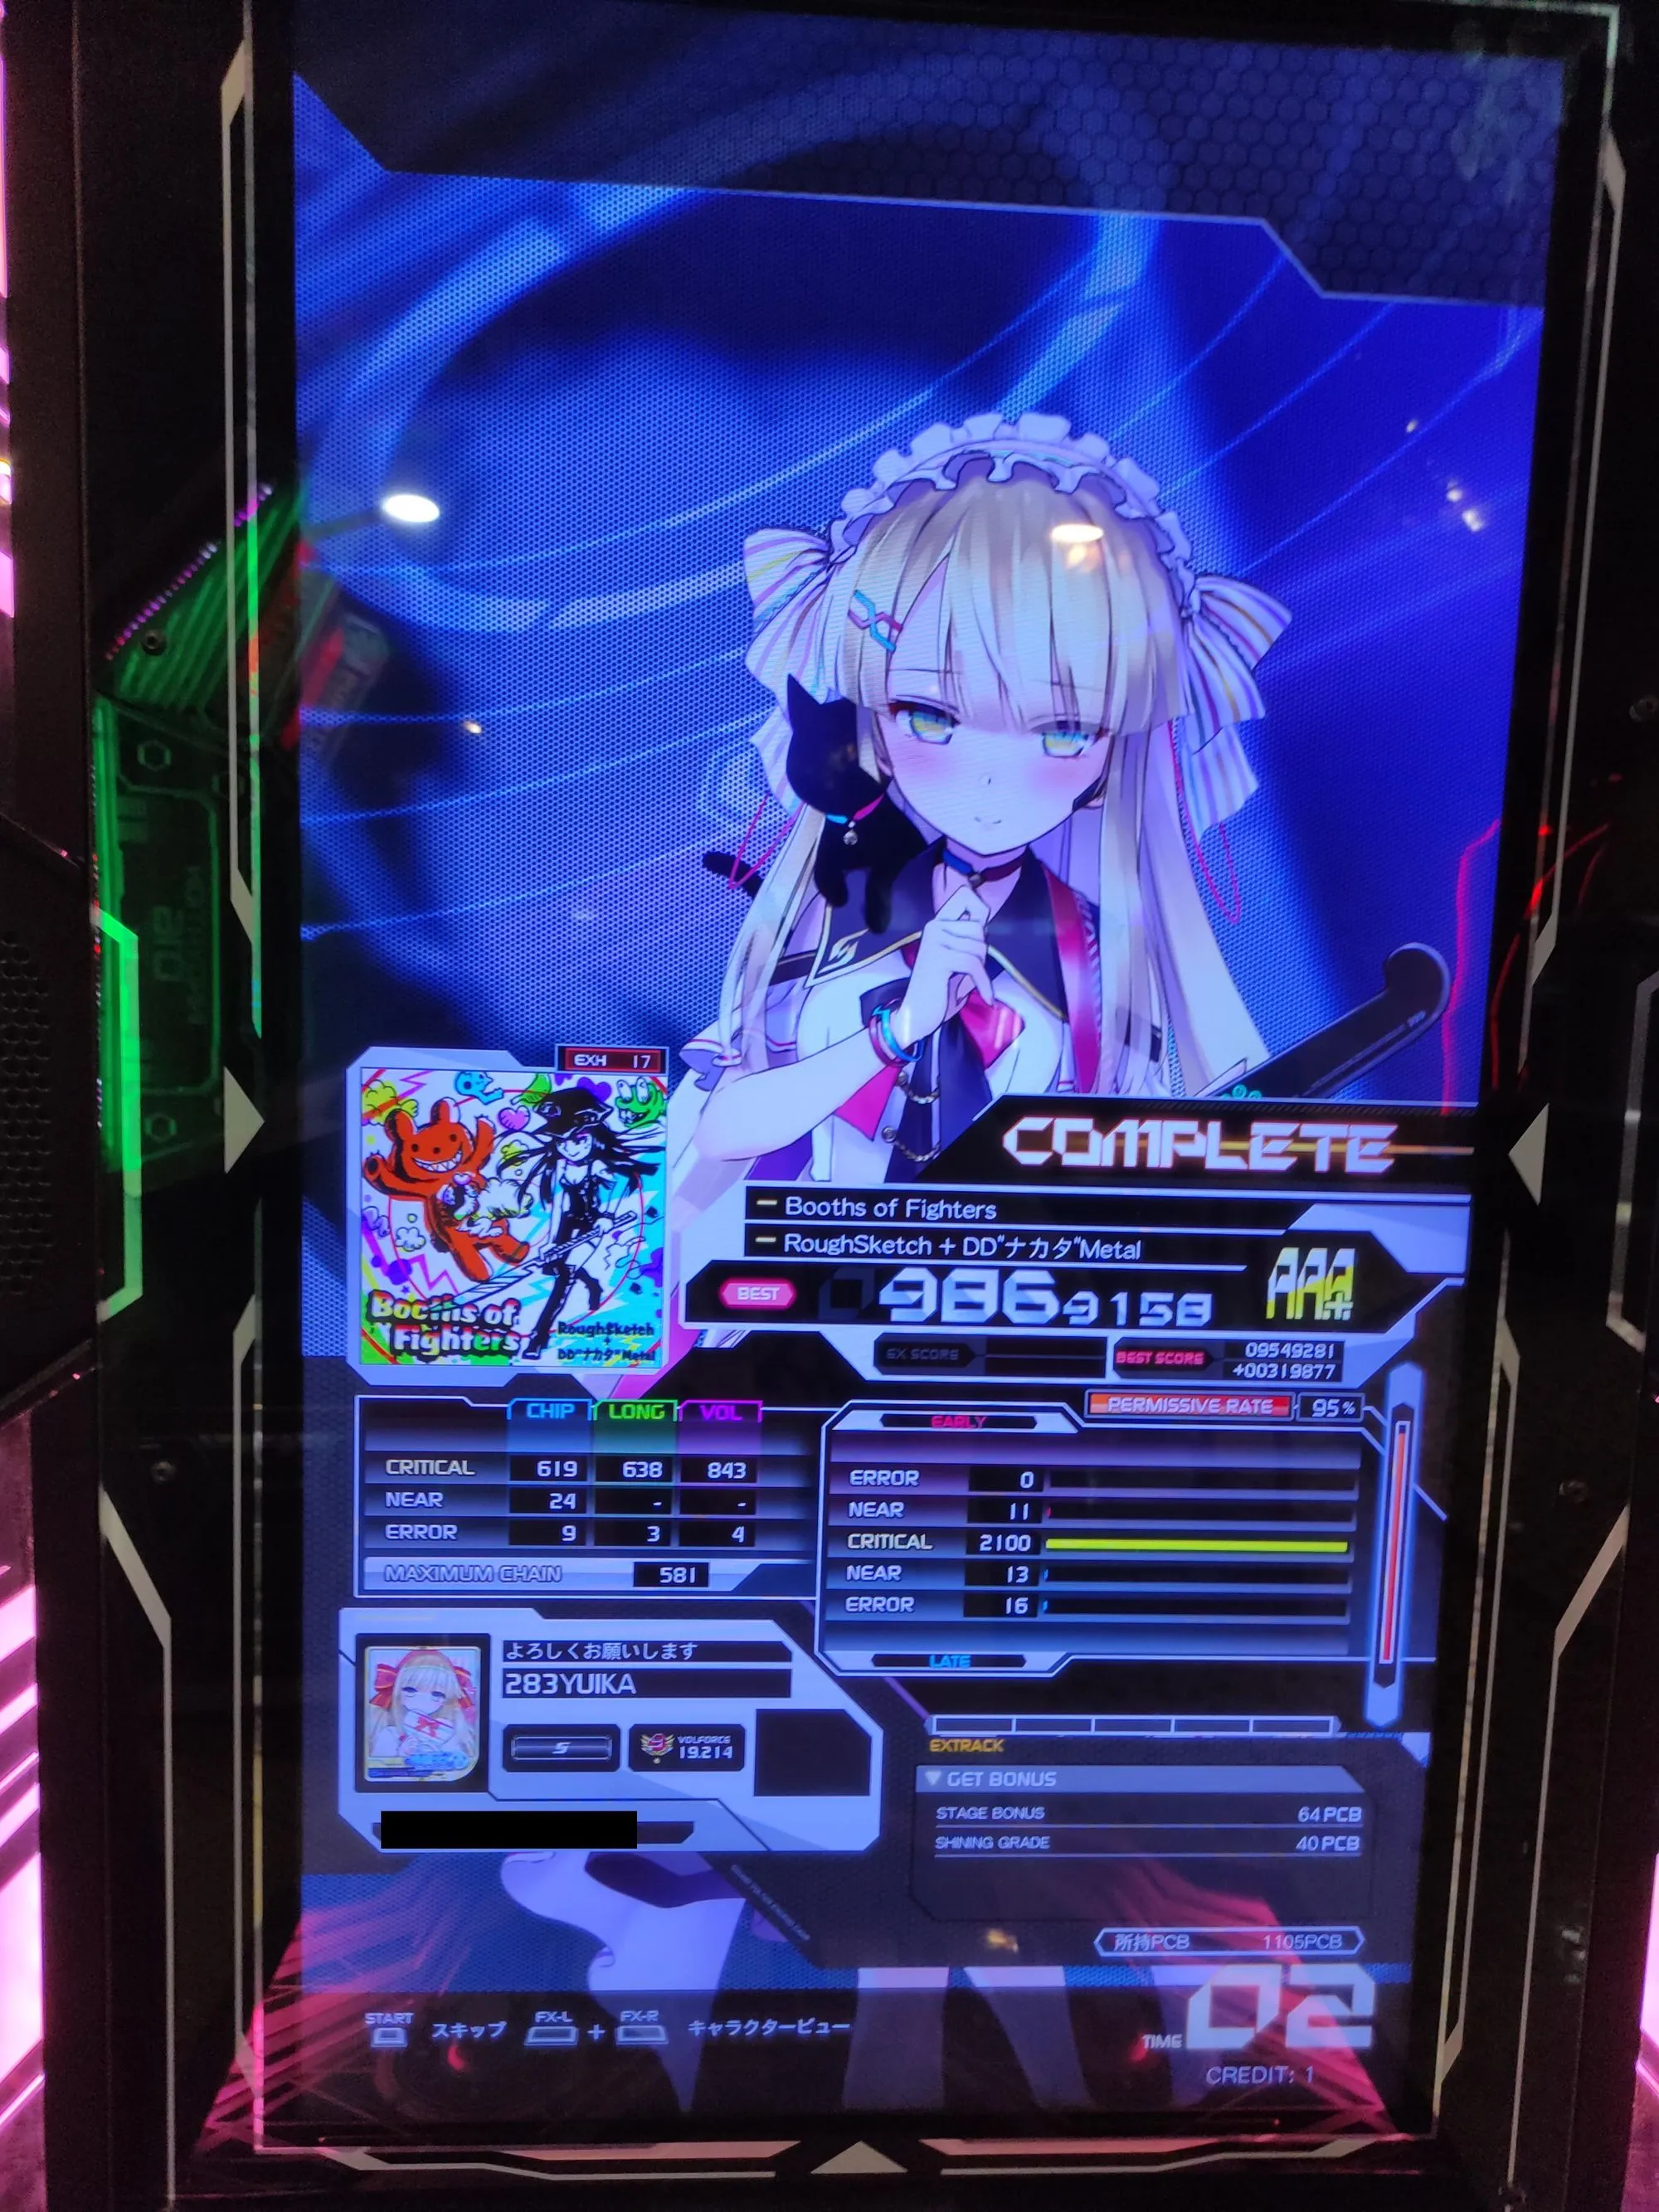 Booths of Fighters EXH 17 9869158